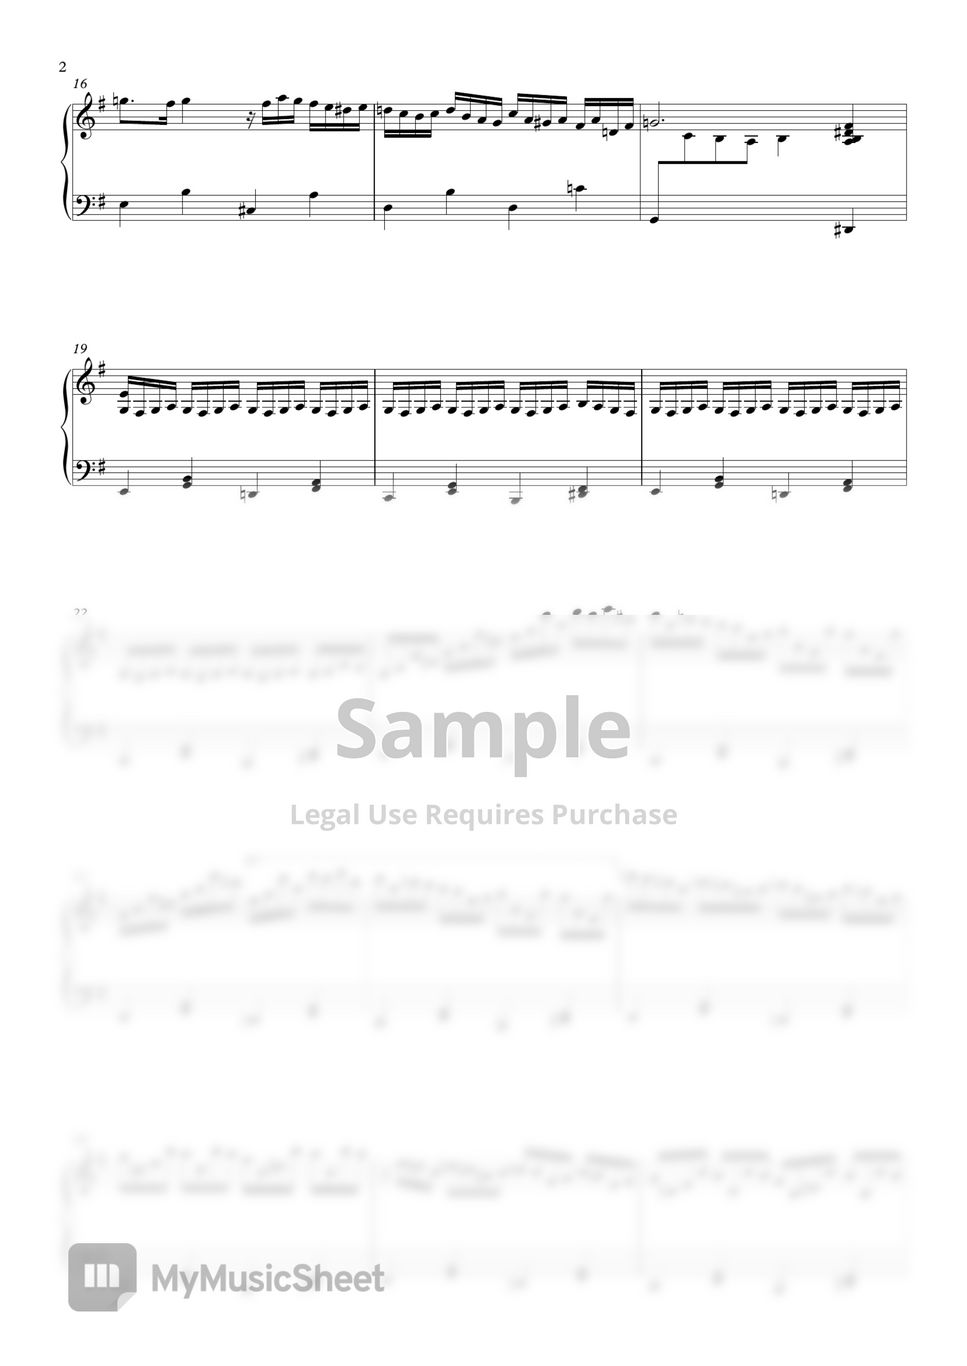 Secret OST - Sheet Music Book (8 Pieces) (Easy ver.) by Cheong Lin